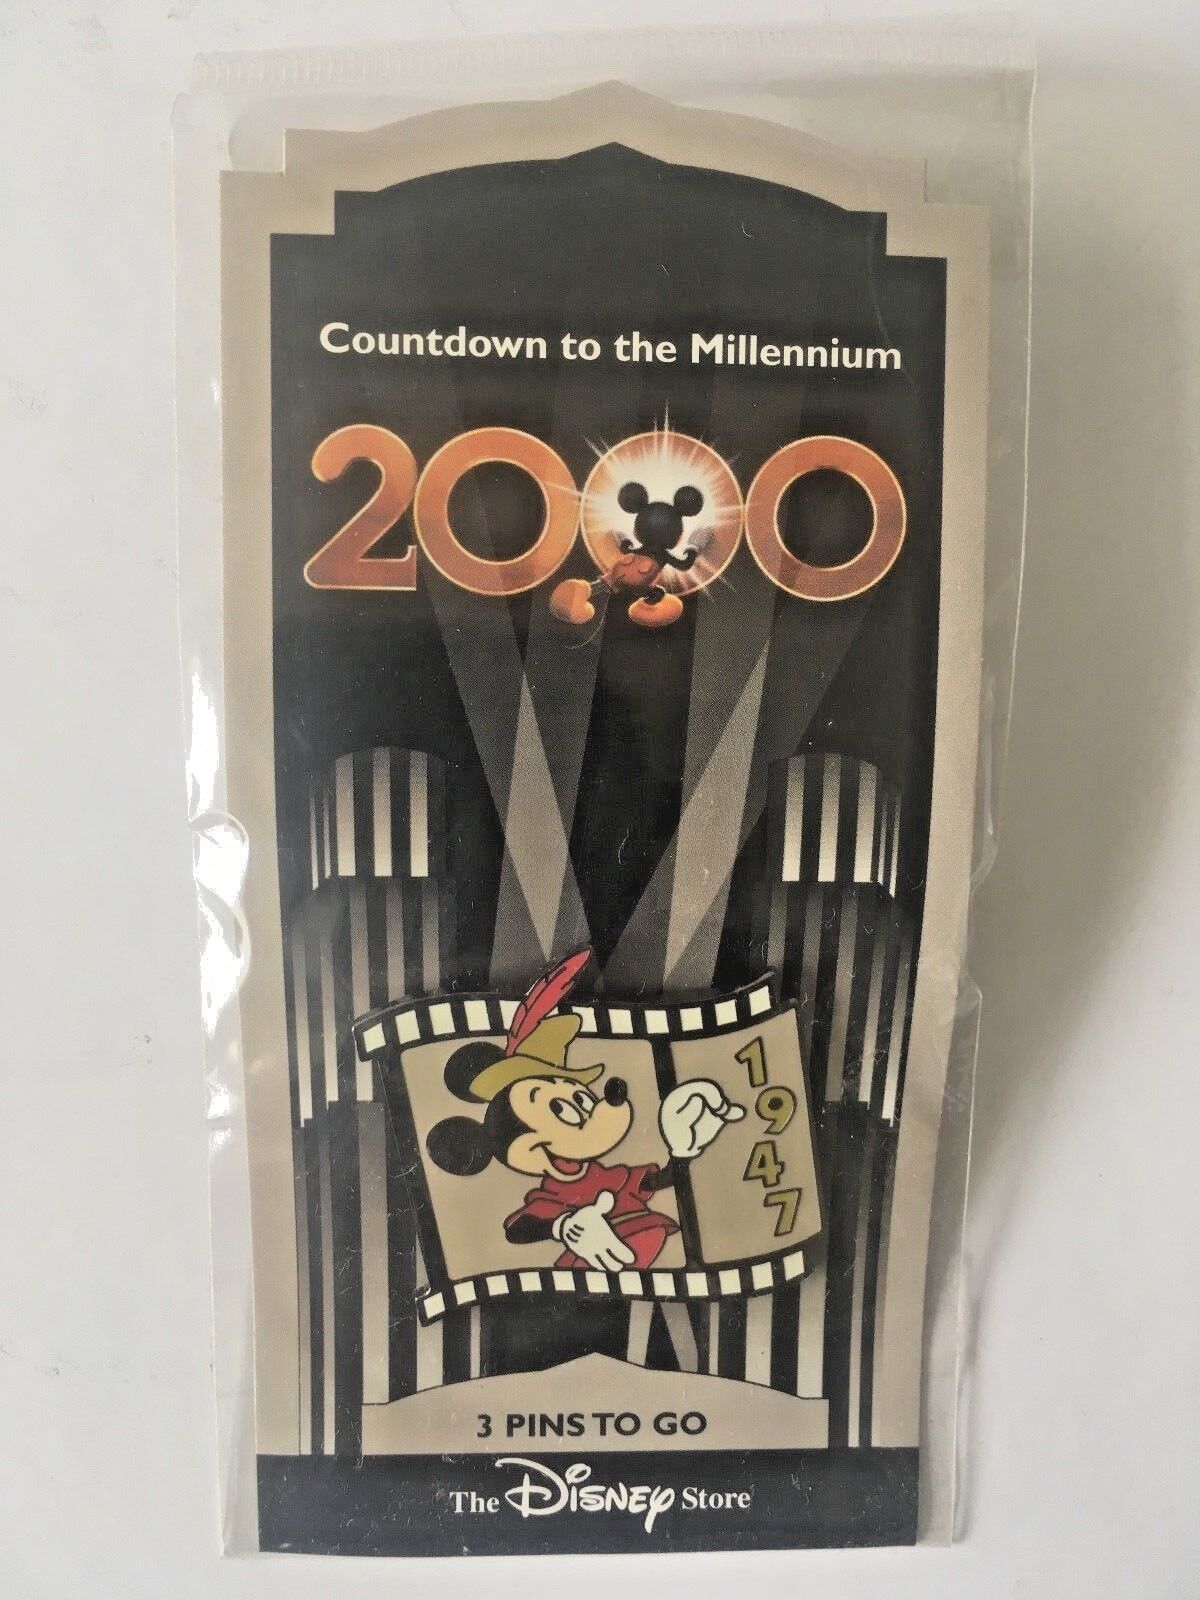 Disney’s Countdown to the Millennium Pin #4 Mickey Mouse through the years 1947